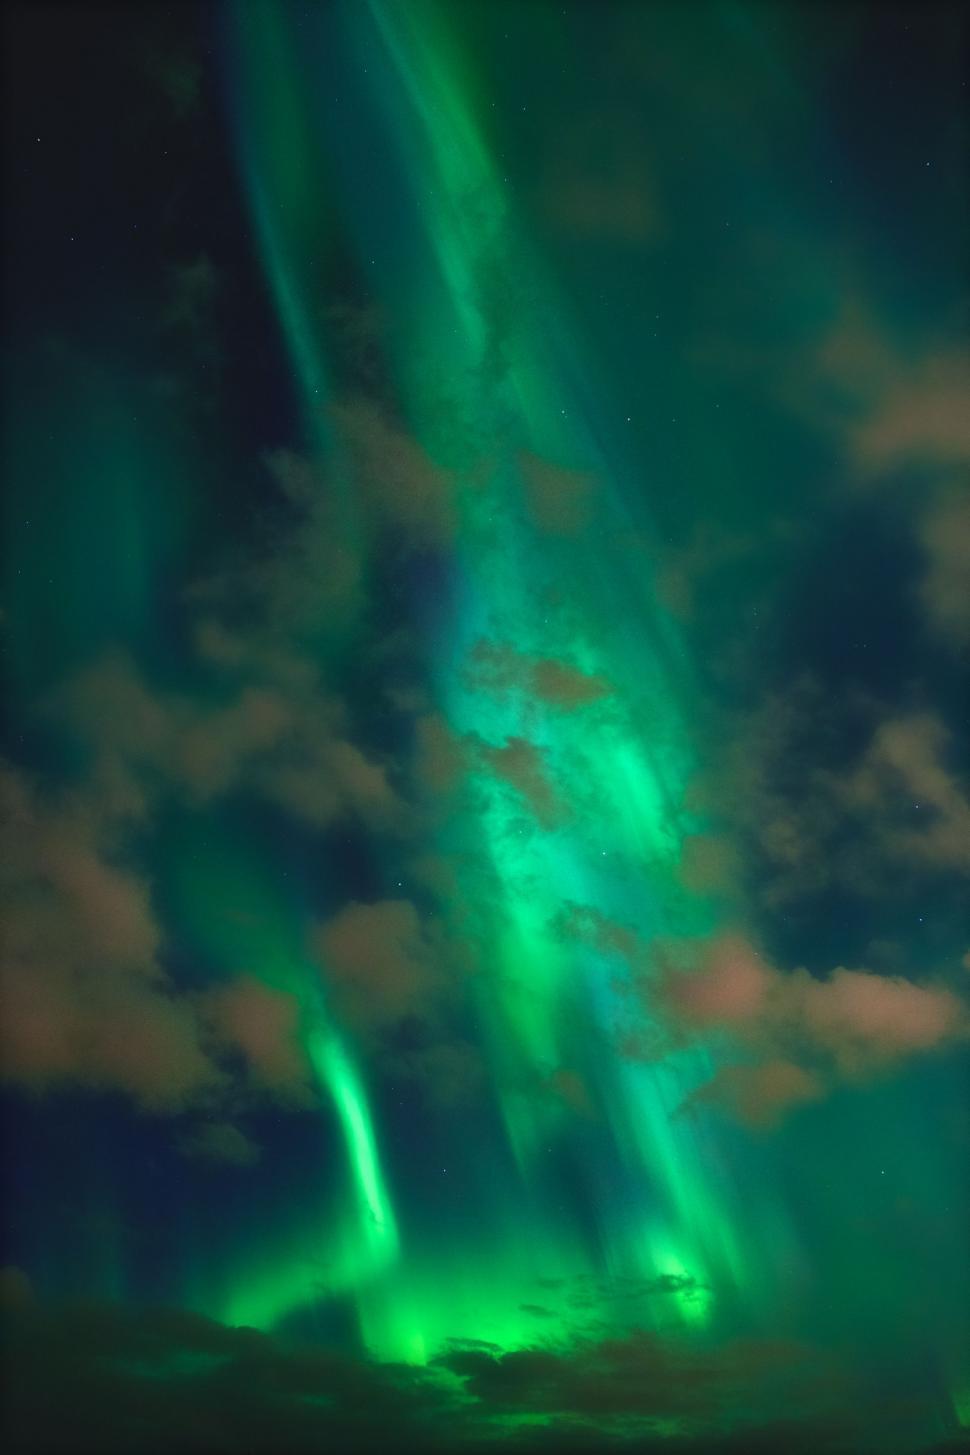 Free Image of Green and White Aurora Bore in the Night Sky 